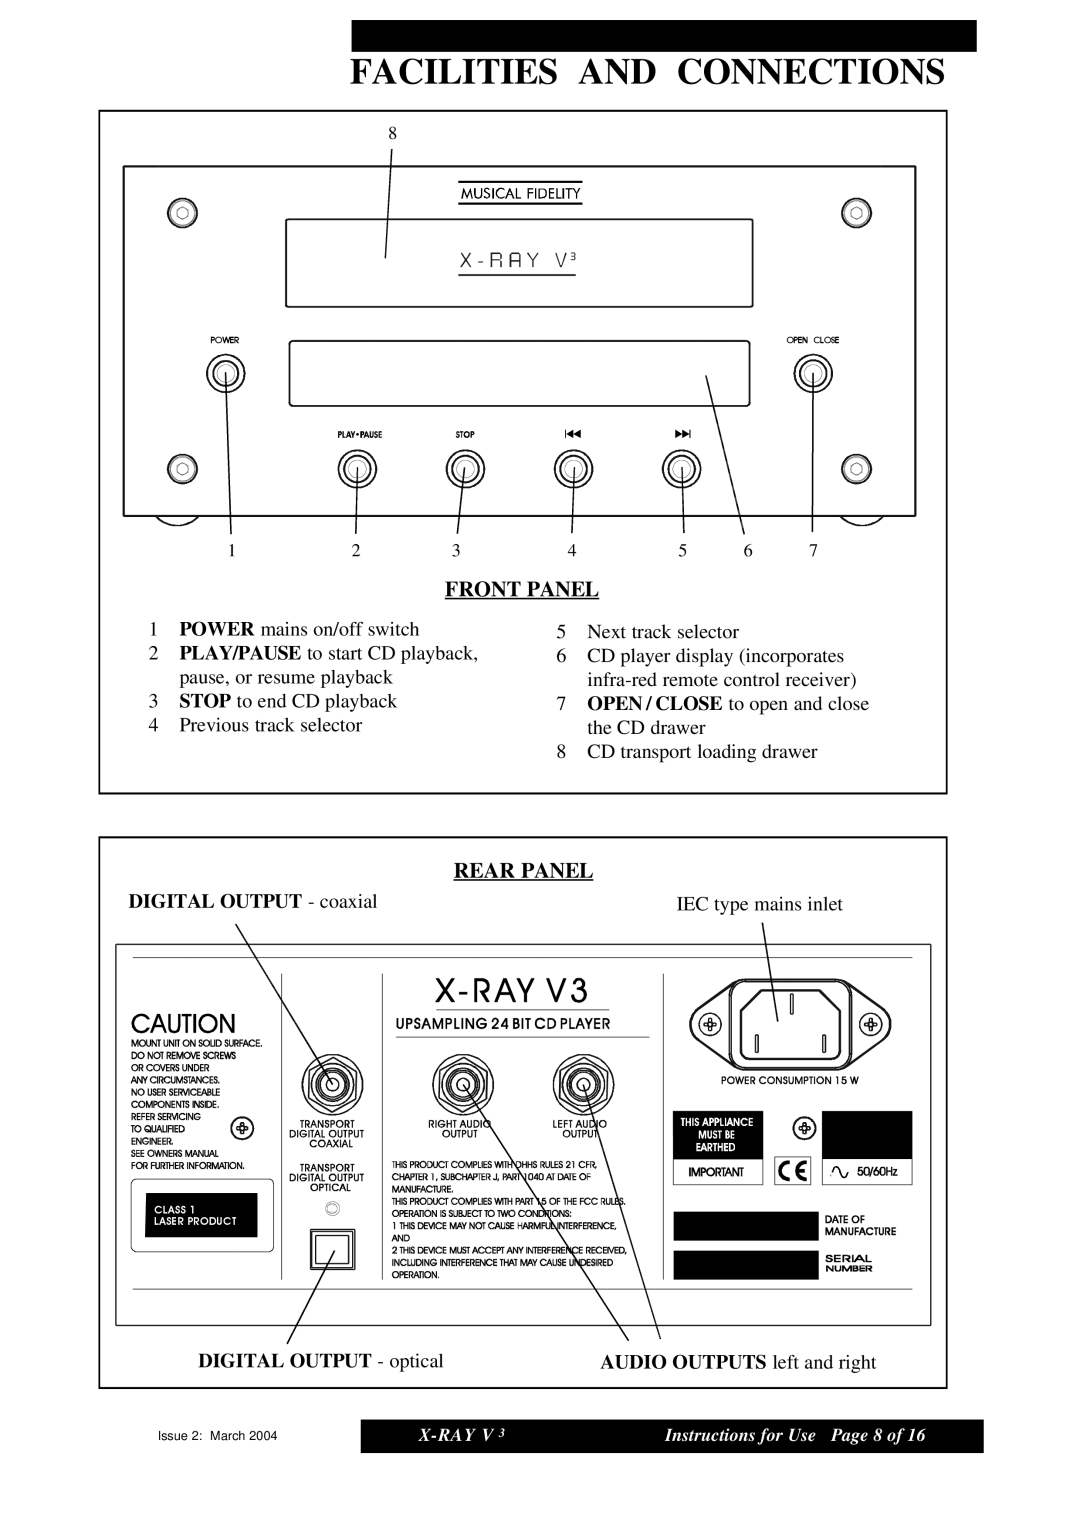 Musical Fidelity X-RAY V3 manual Facilities And Connections, Front Panel, Rear Panel, DIGITAL OUTPUT - coaxial 